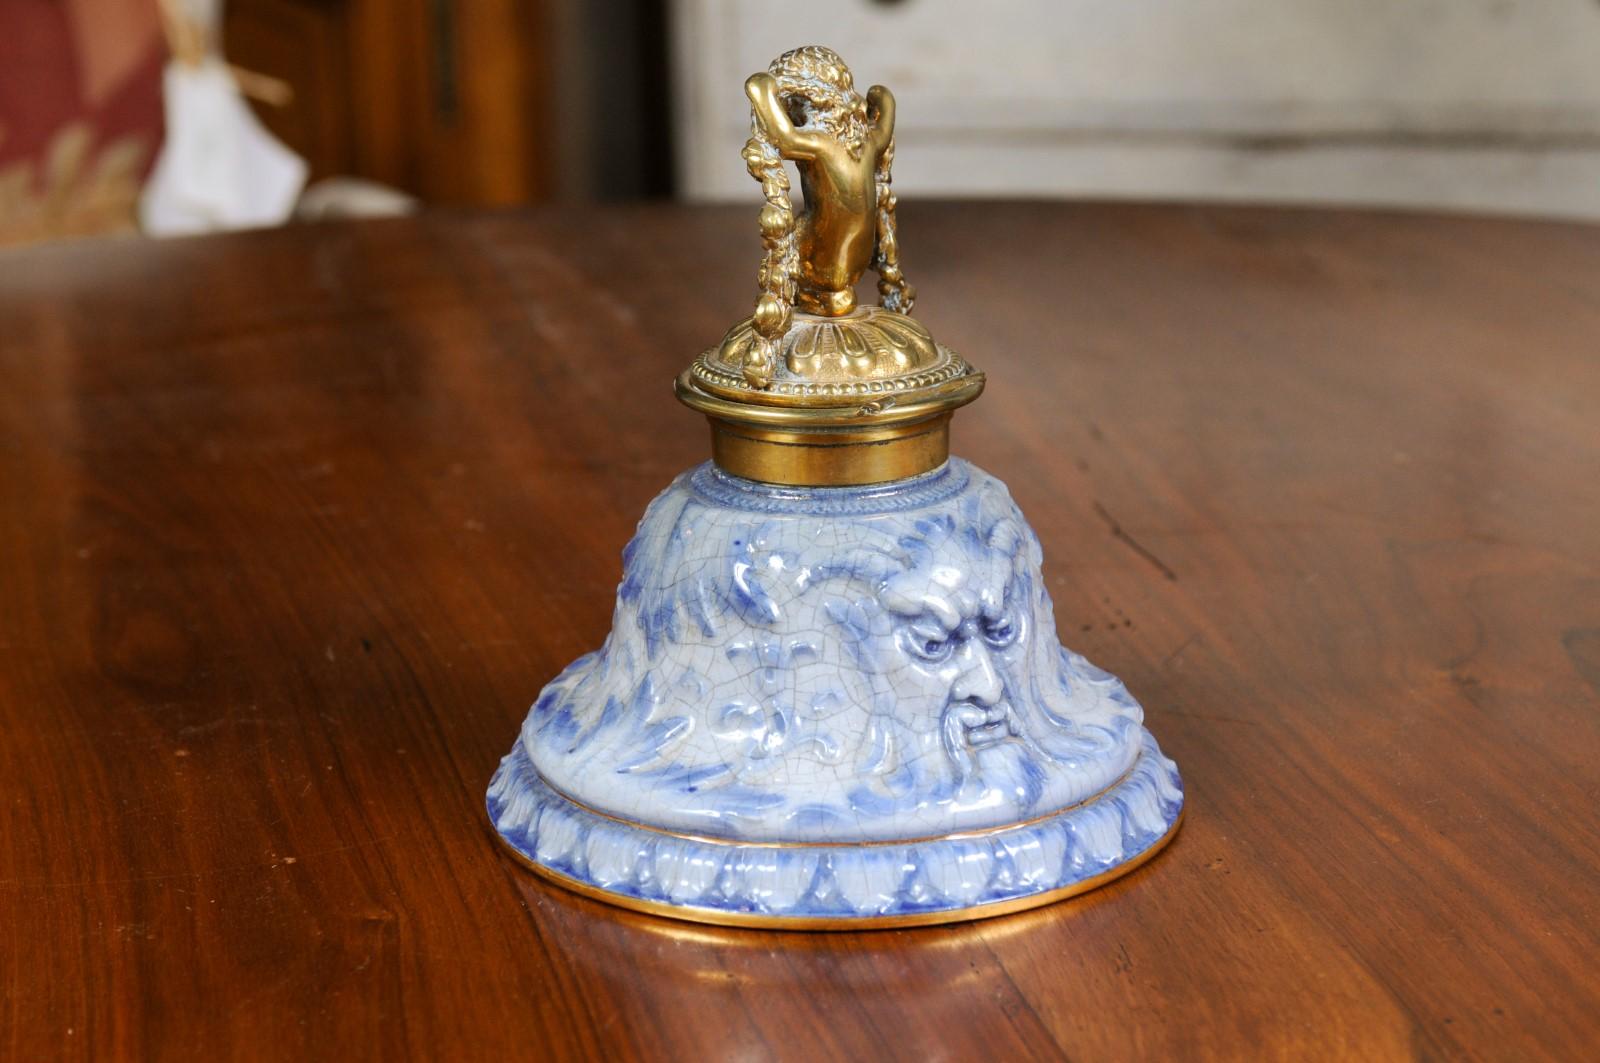 English Victorian Period 19th Century Porcelain Inkwell with Brass Putto Motif In Good Condition For Sale In Atlanta, GA